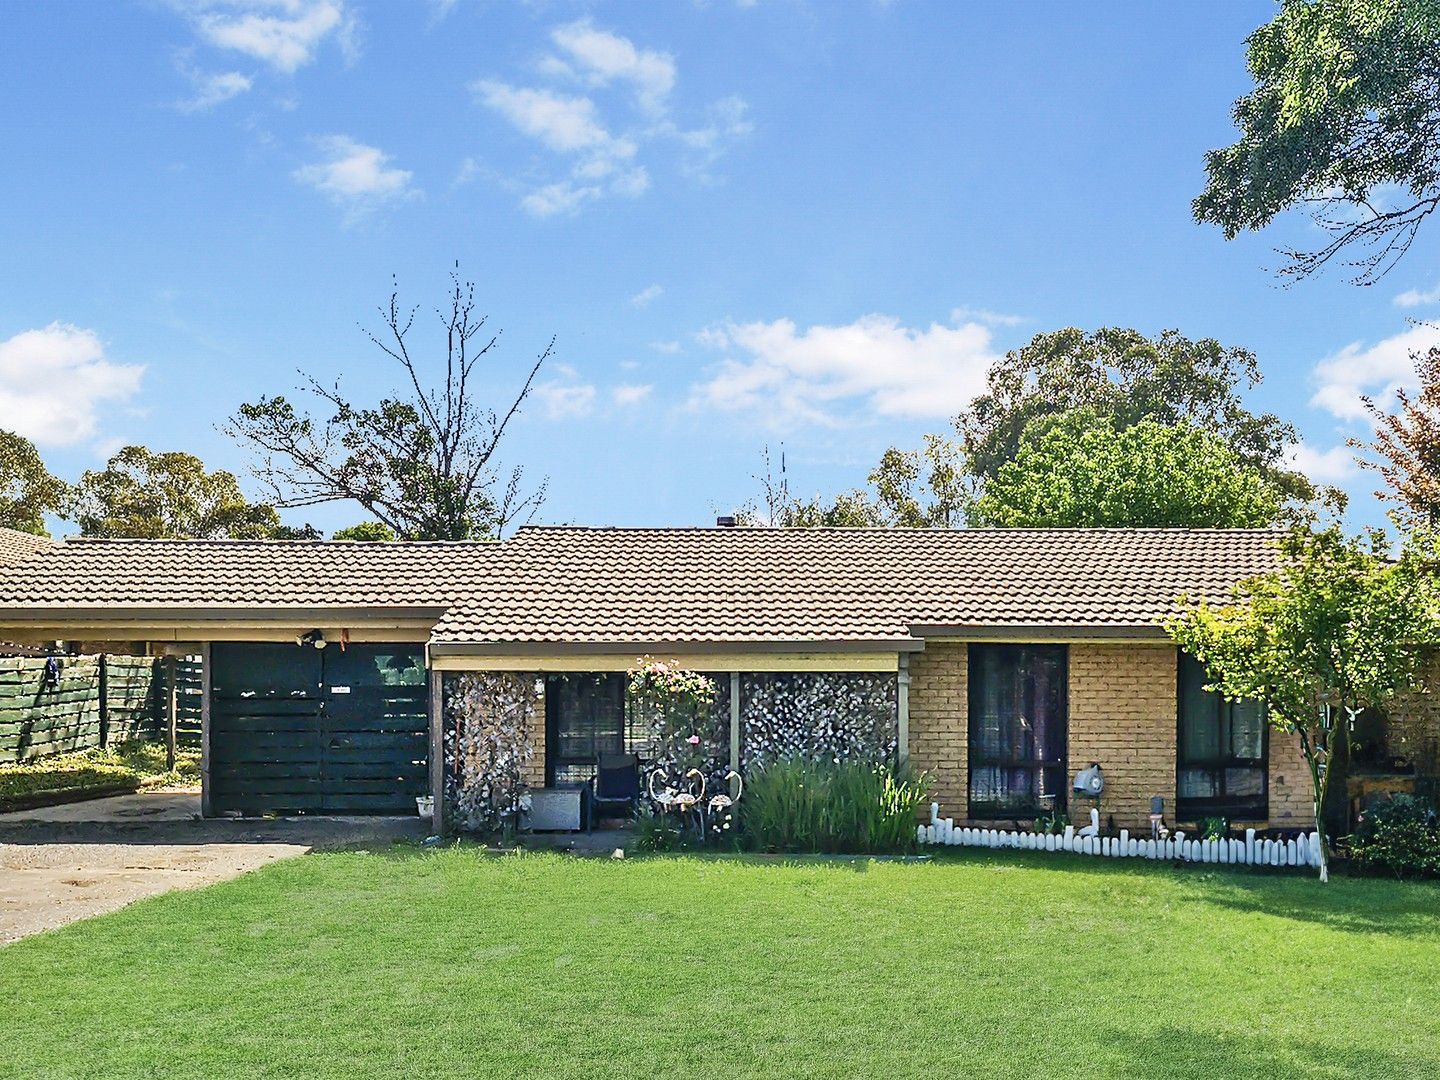 3 bedrooms Block of Units in 75 Bannerman Crescent KELSO NSW, 2795